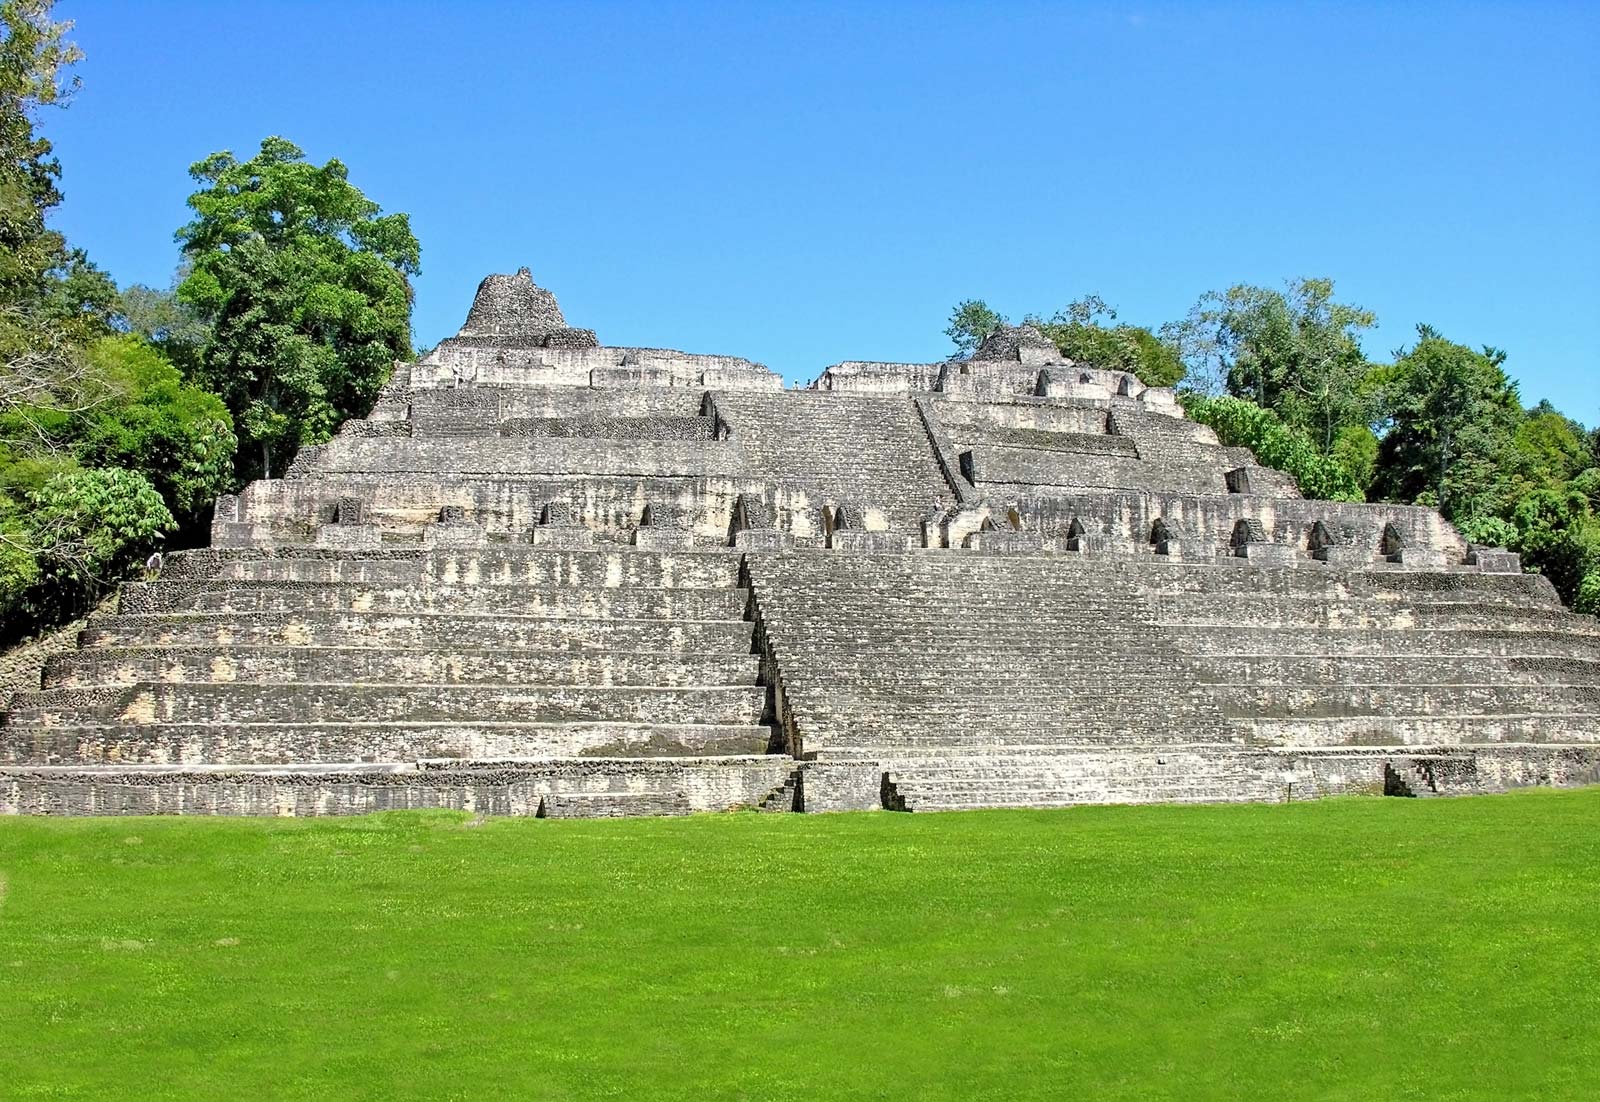 A Brief Overview of the Mayan Creation Story